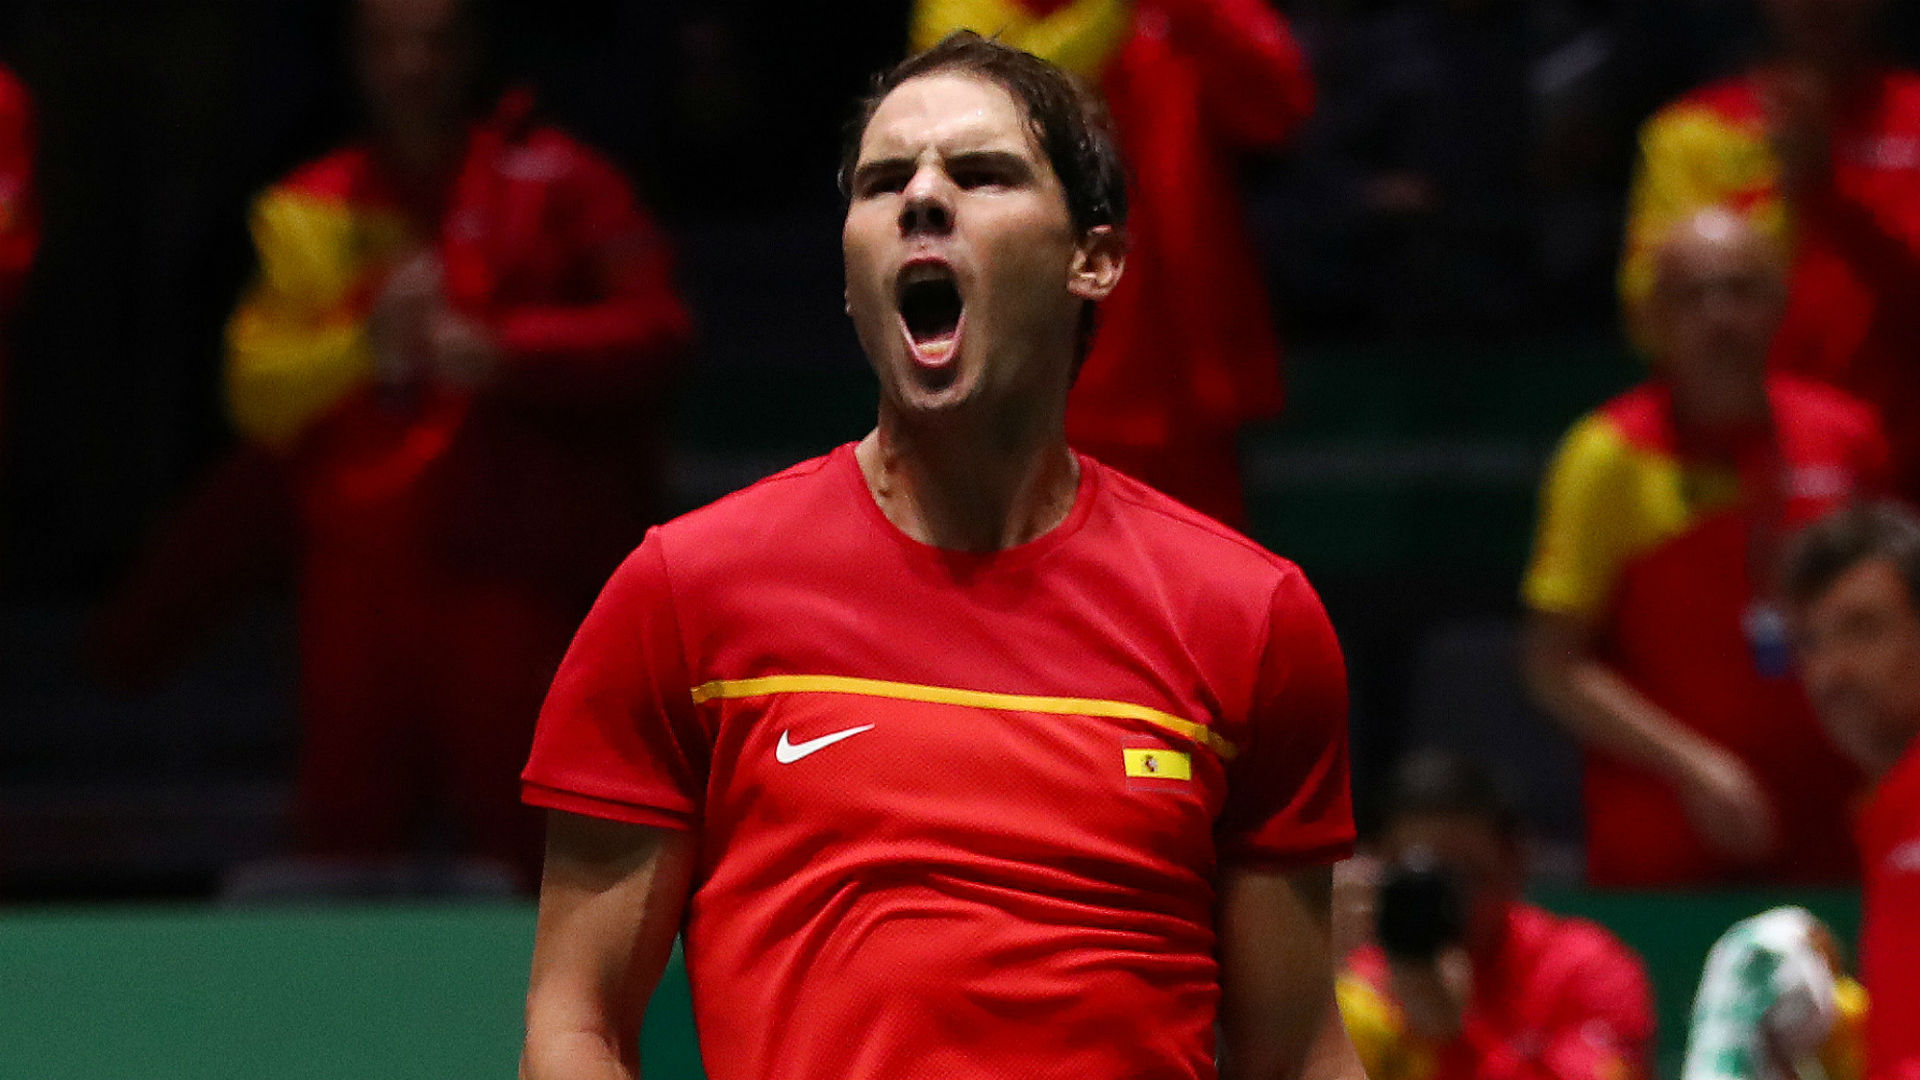 Croatia's hopes of retaining the Davis Cup are over after they were beaten by hosts Spain in Madrid.